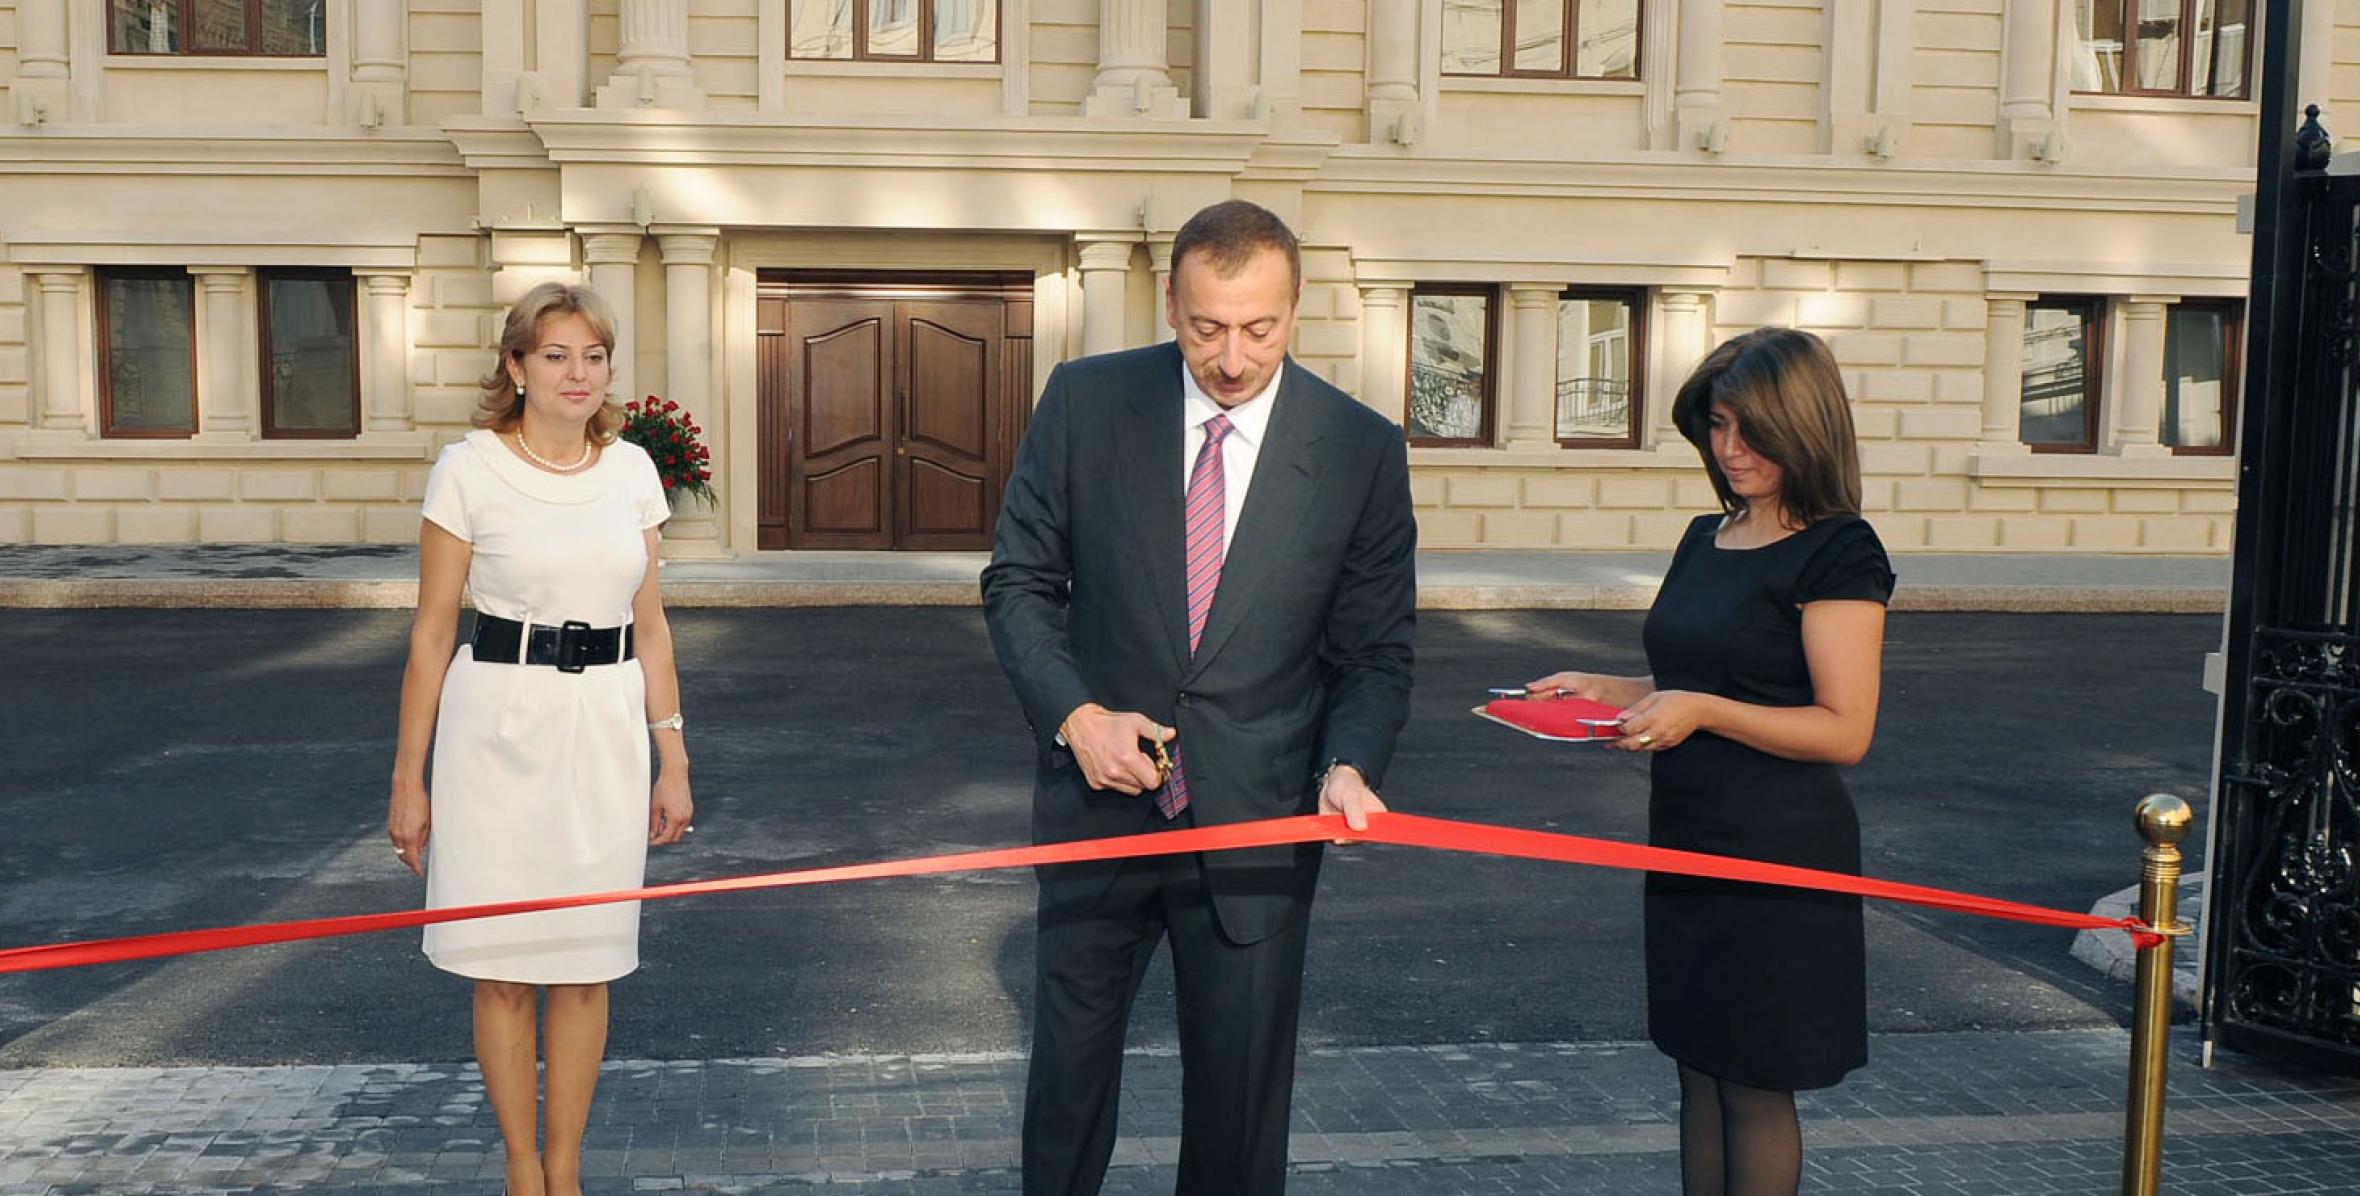 Ilham Aliyev attended the ceremony to commission school No 6 in Baku after reconstruction